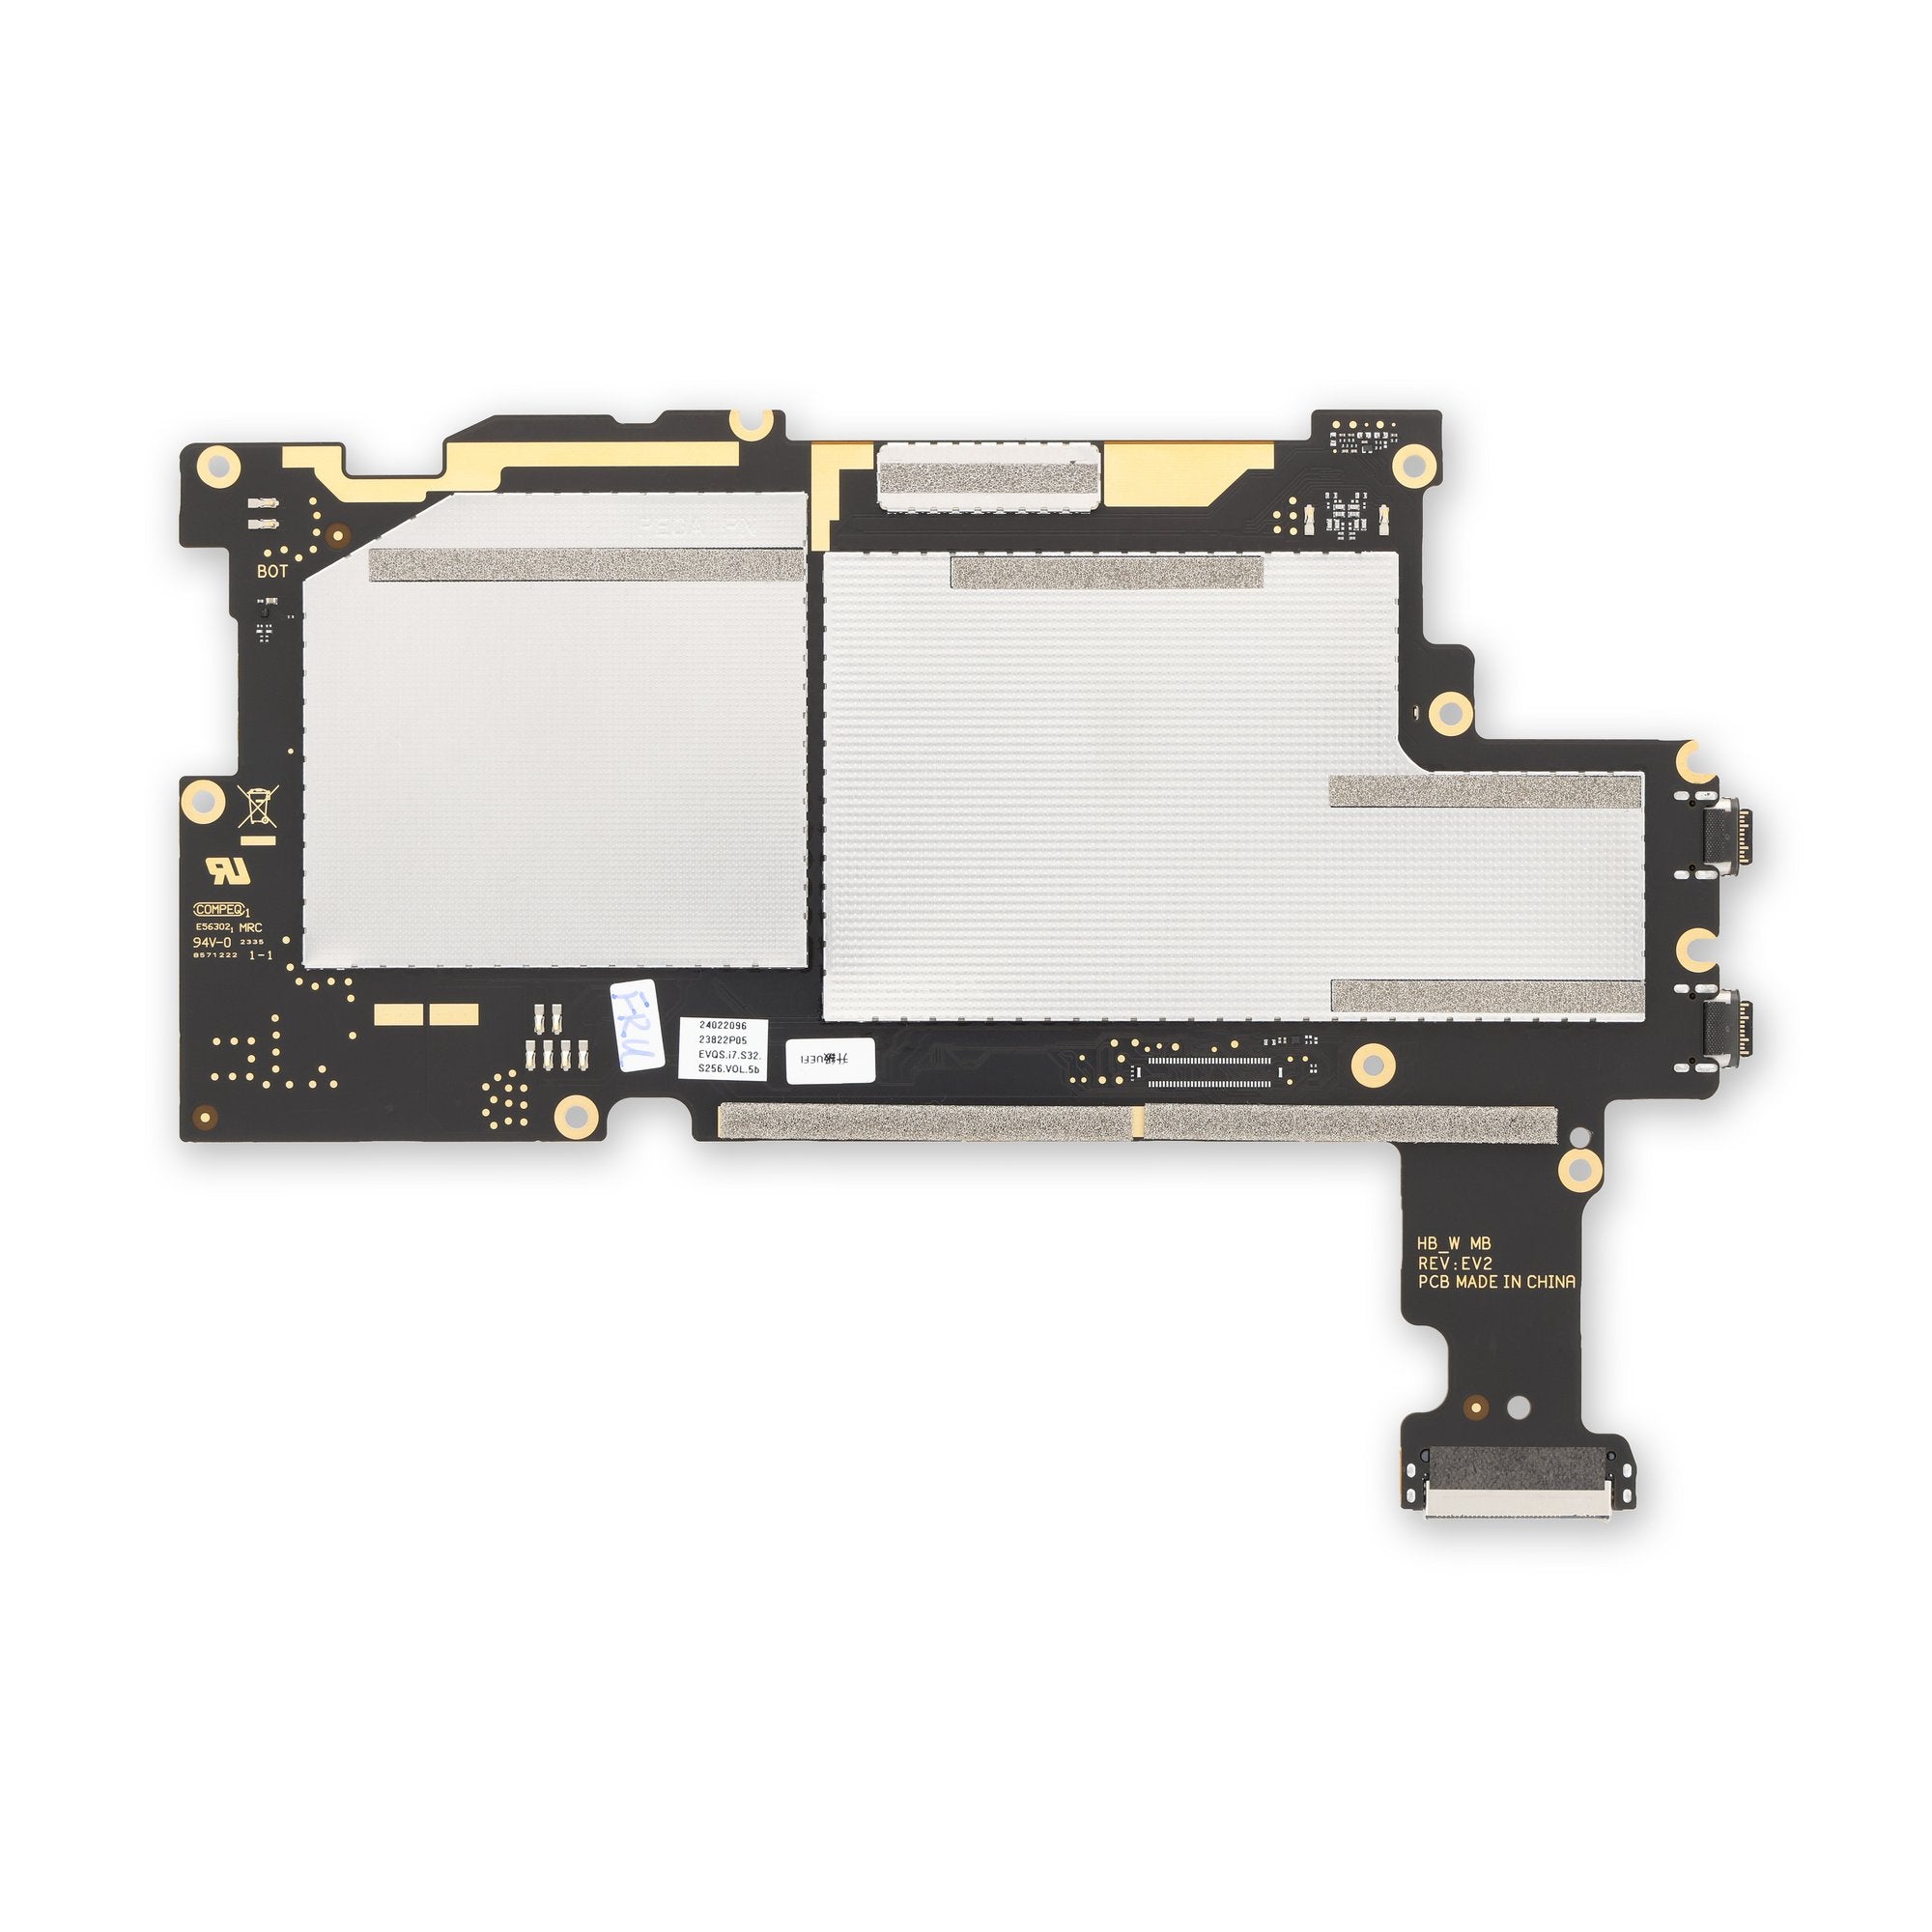 Surface Pro 10 for Business Motherboard - Genuine 8 GB RAM OEM i5 Nuvoton